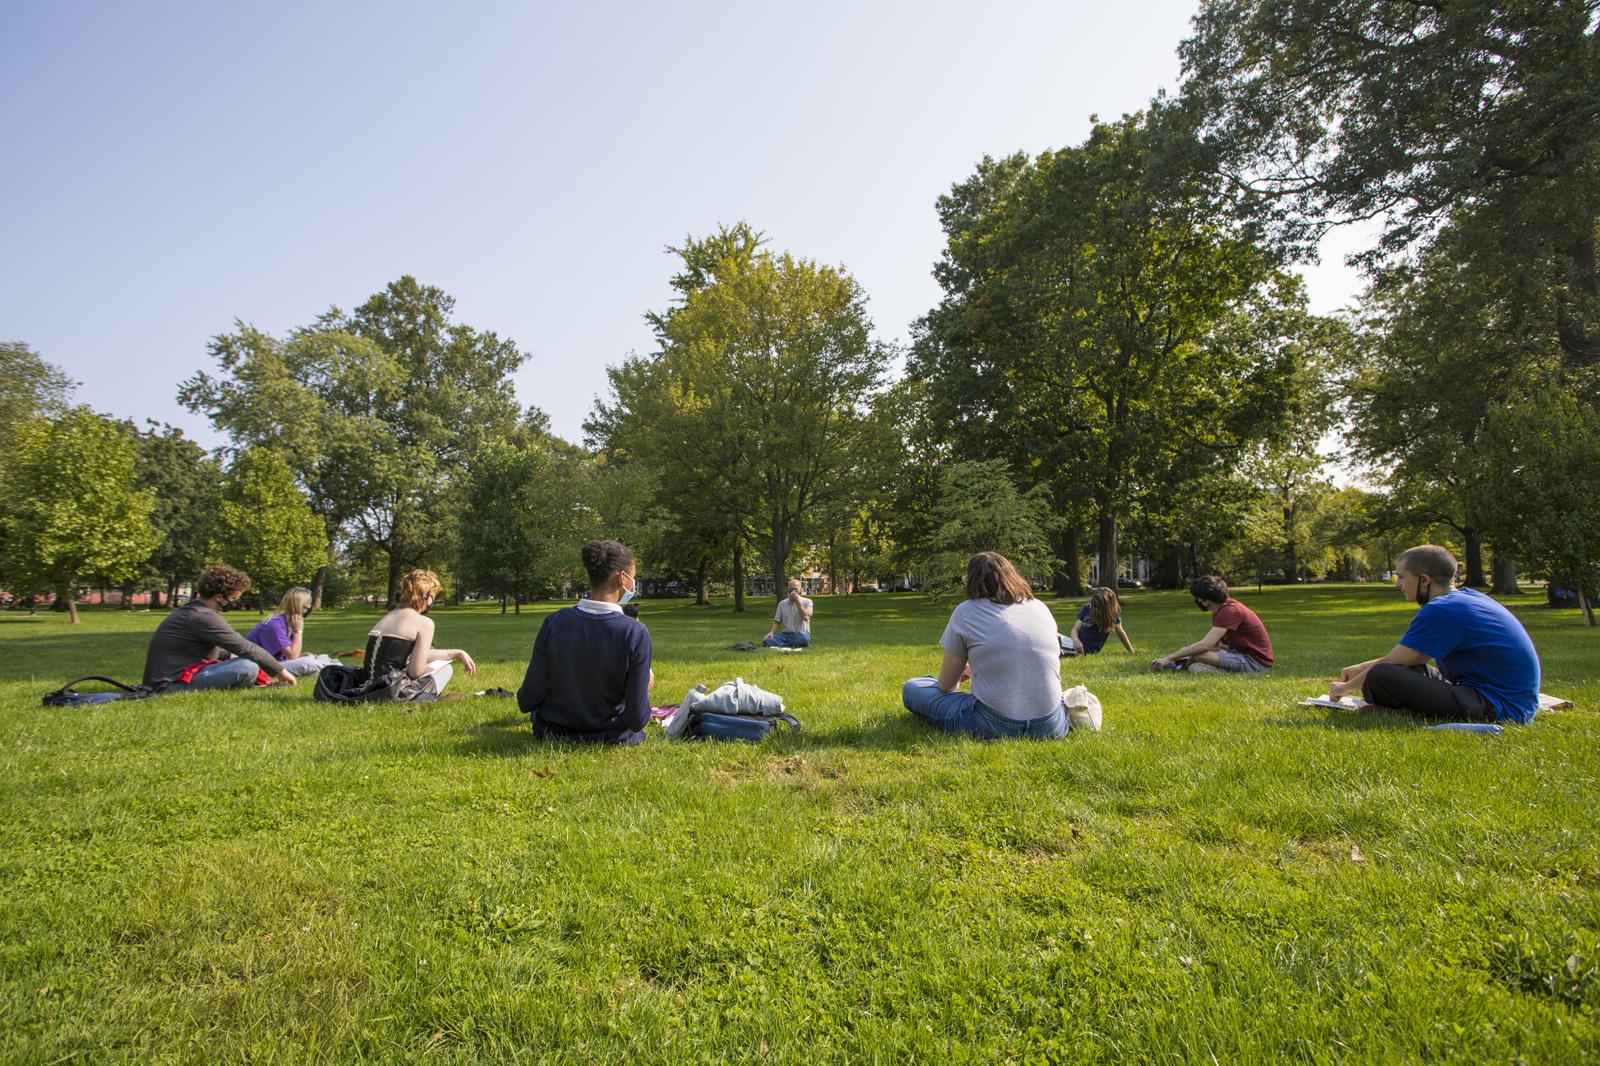 Students sitting in a circle in the grass, spaced widely apart from one another.